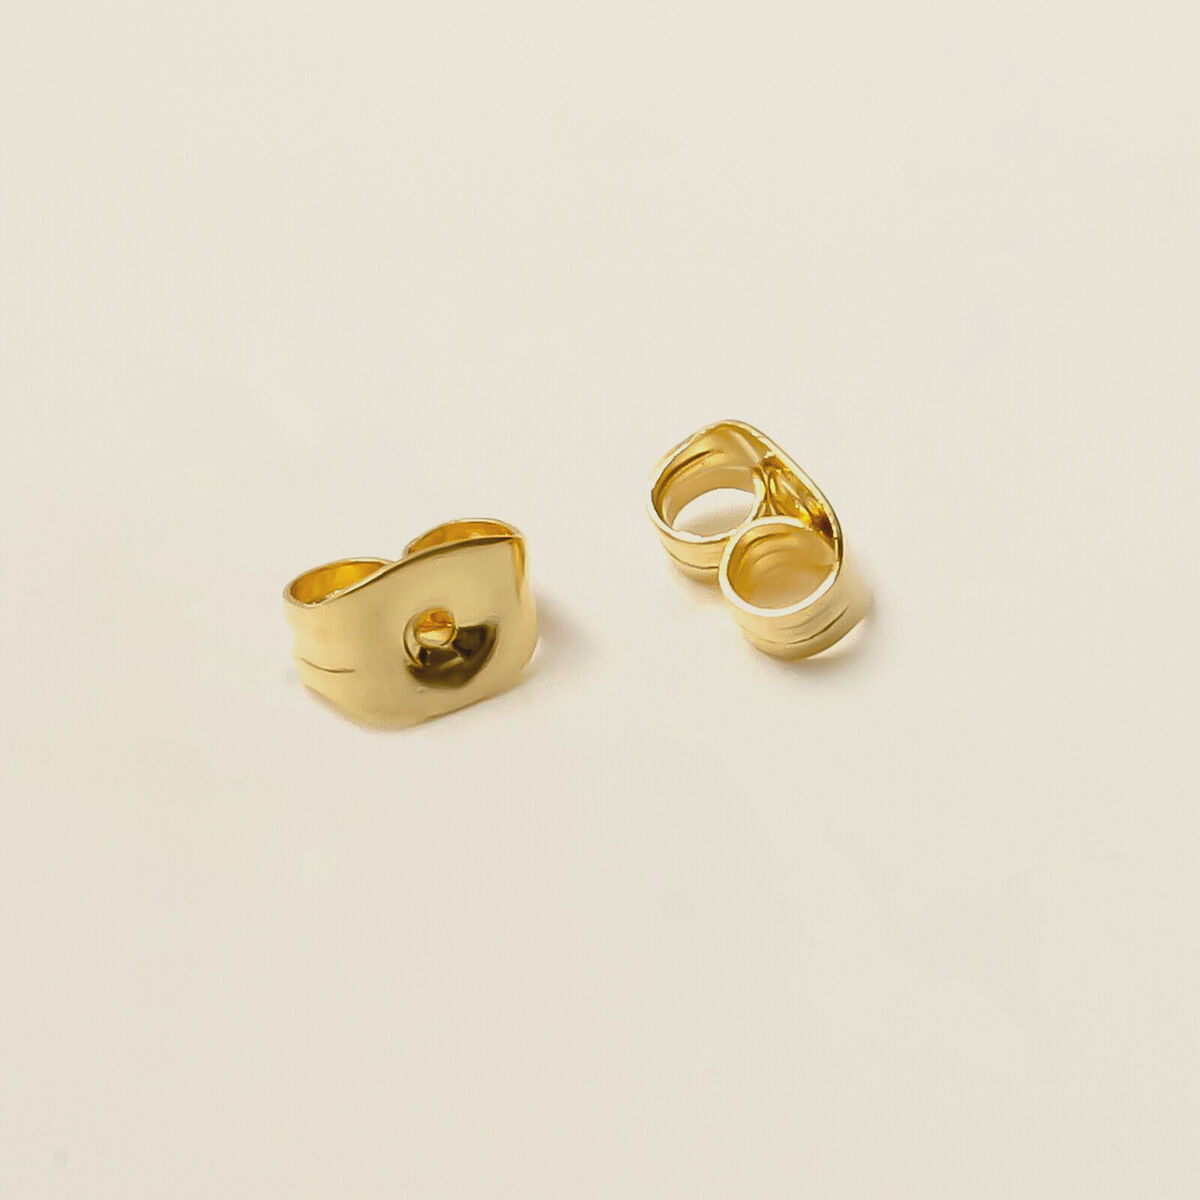 Earring Back Replacement (Screwback Type, Small)